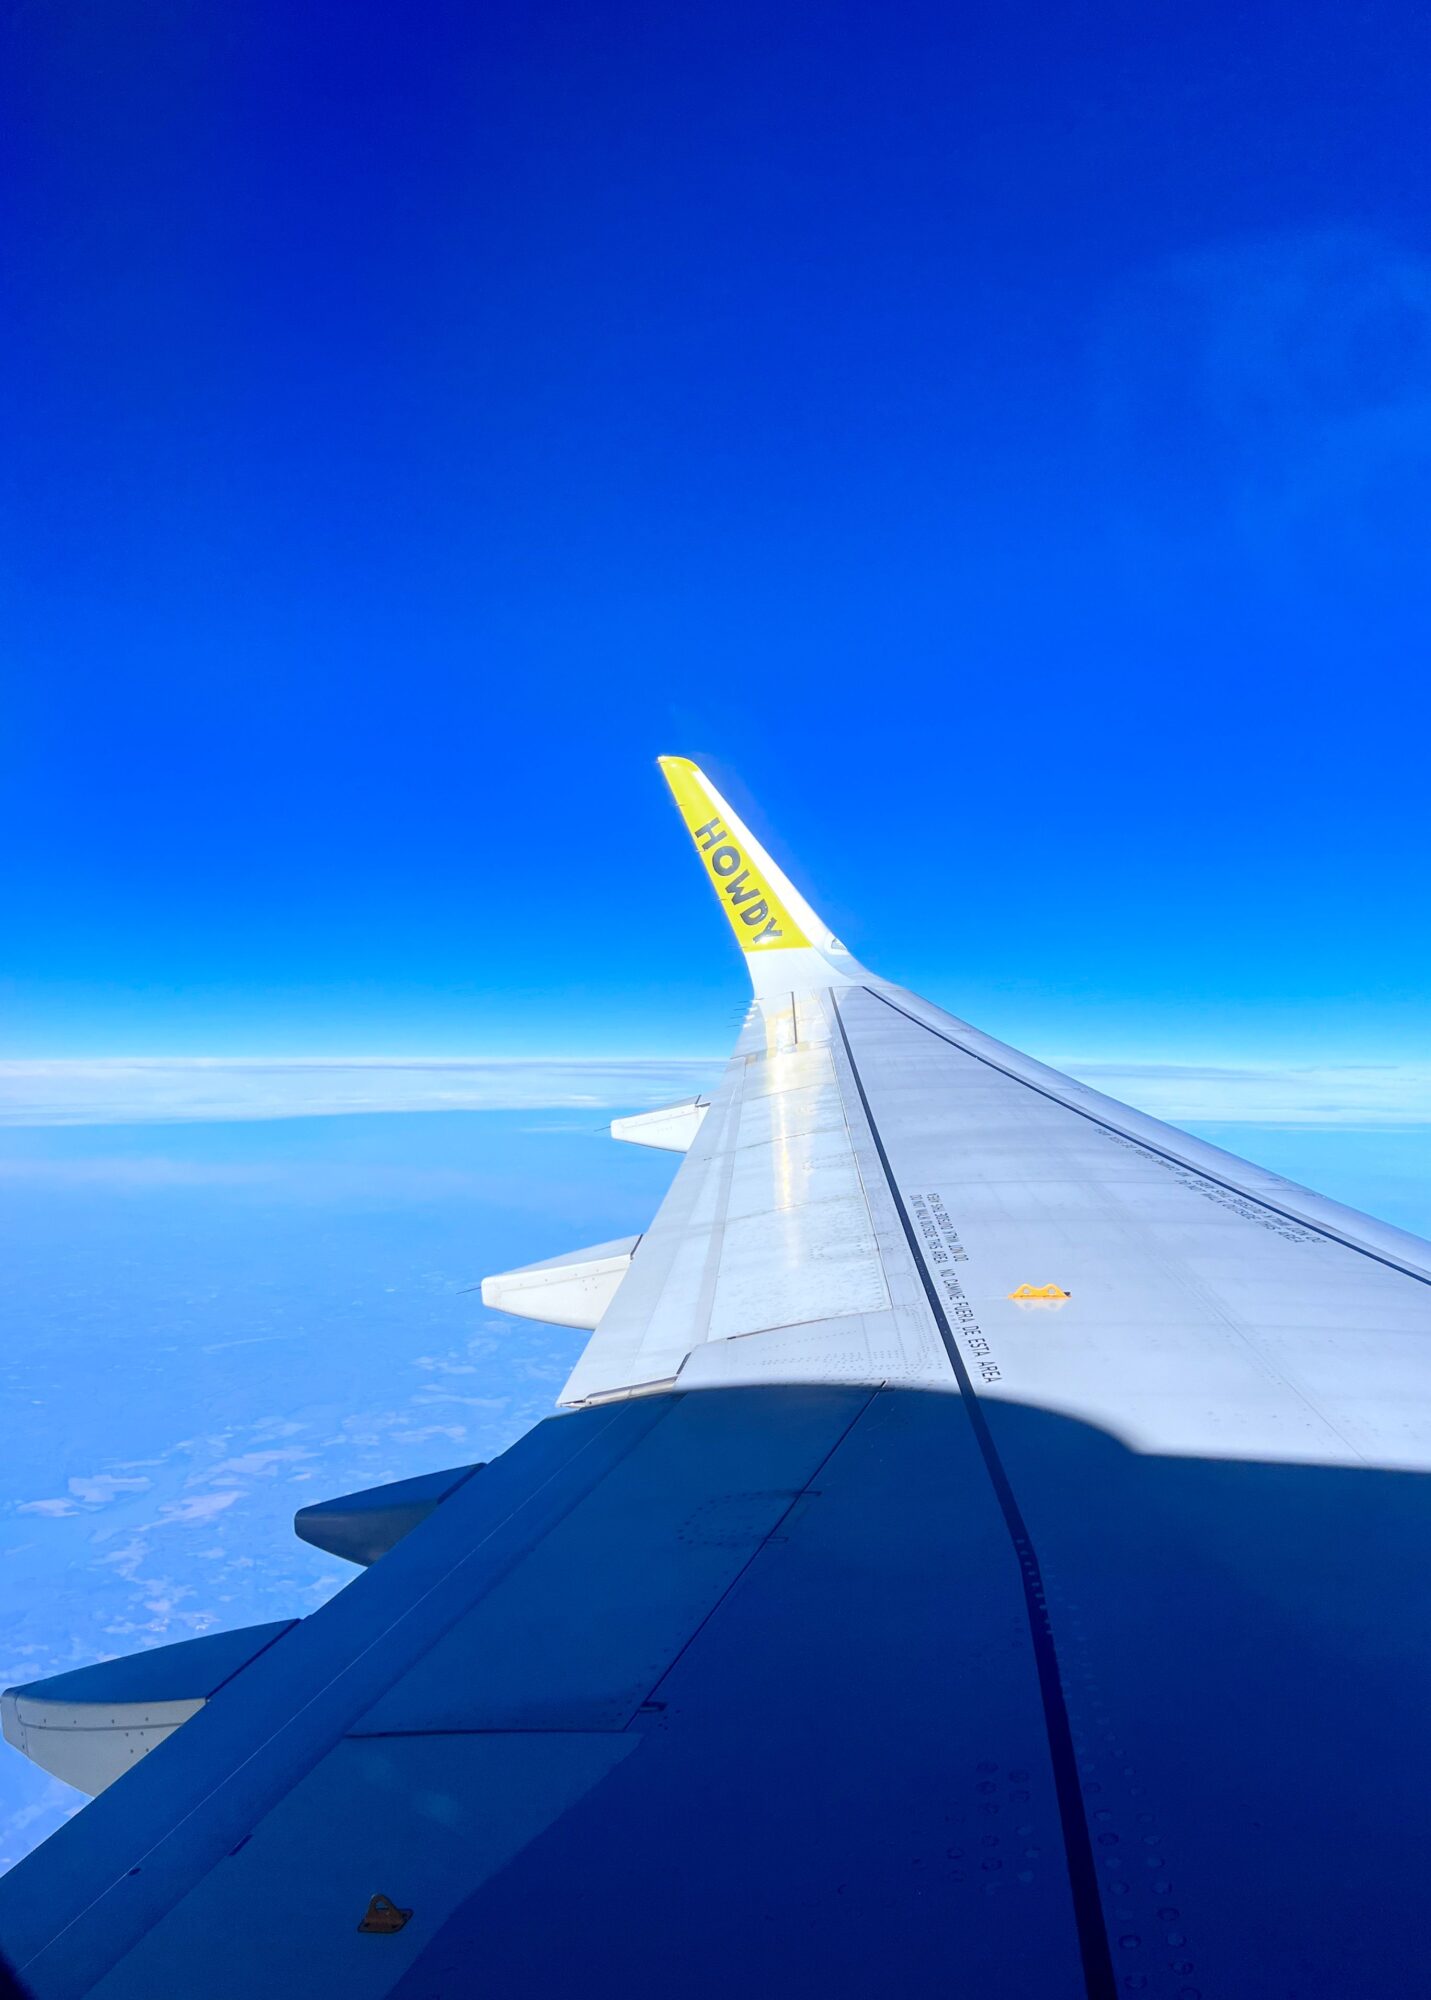 A view of the wing of a Spirit flight in the air